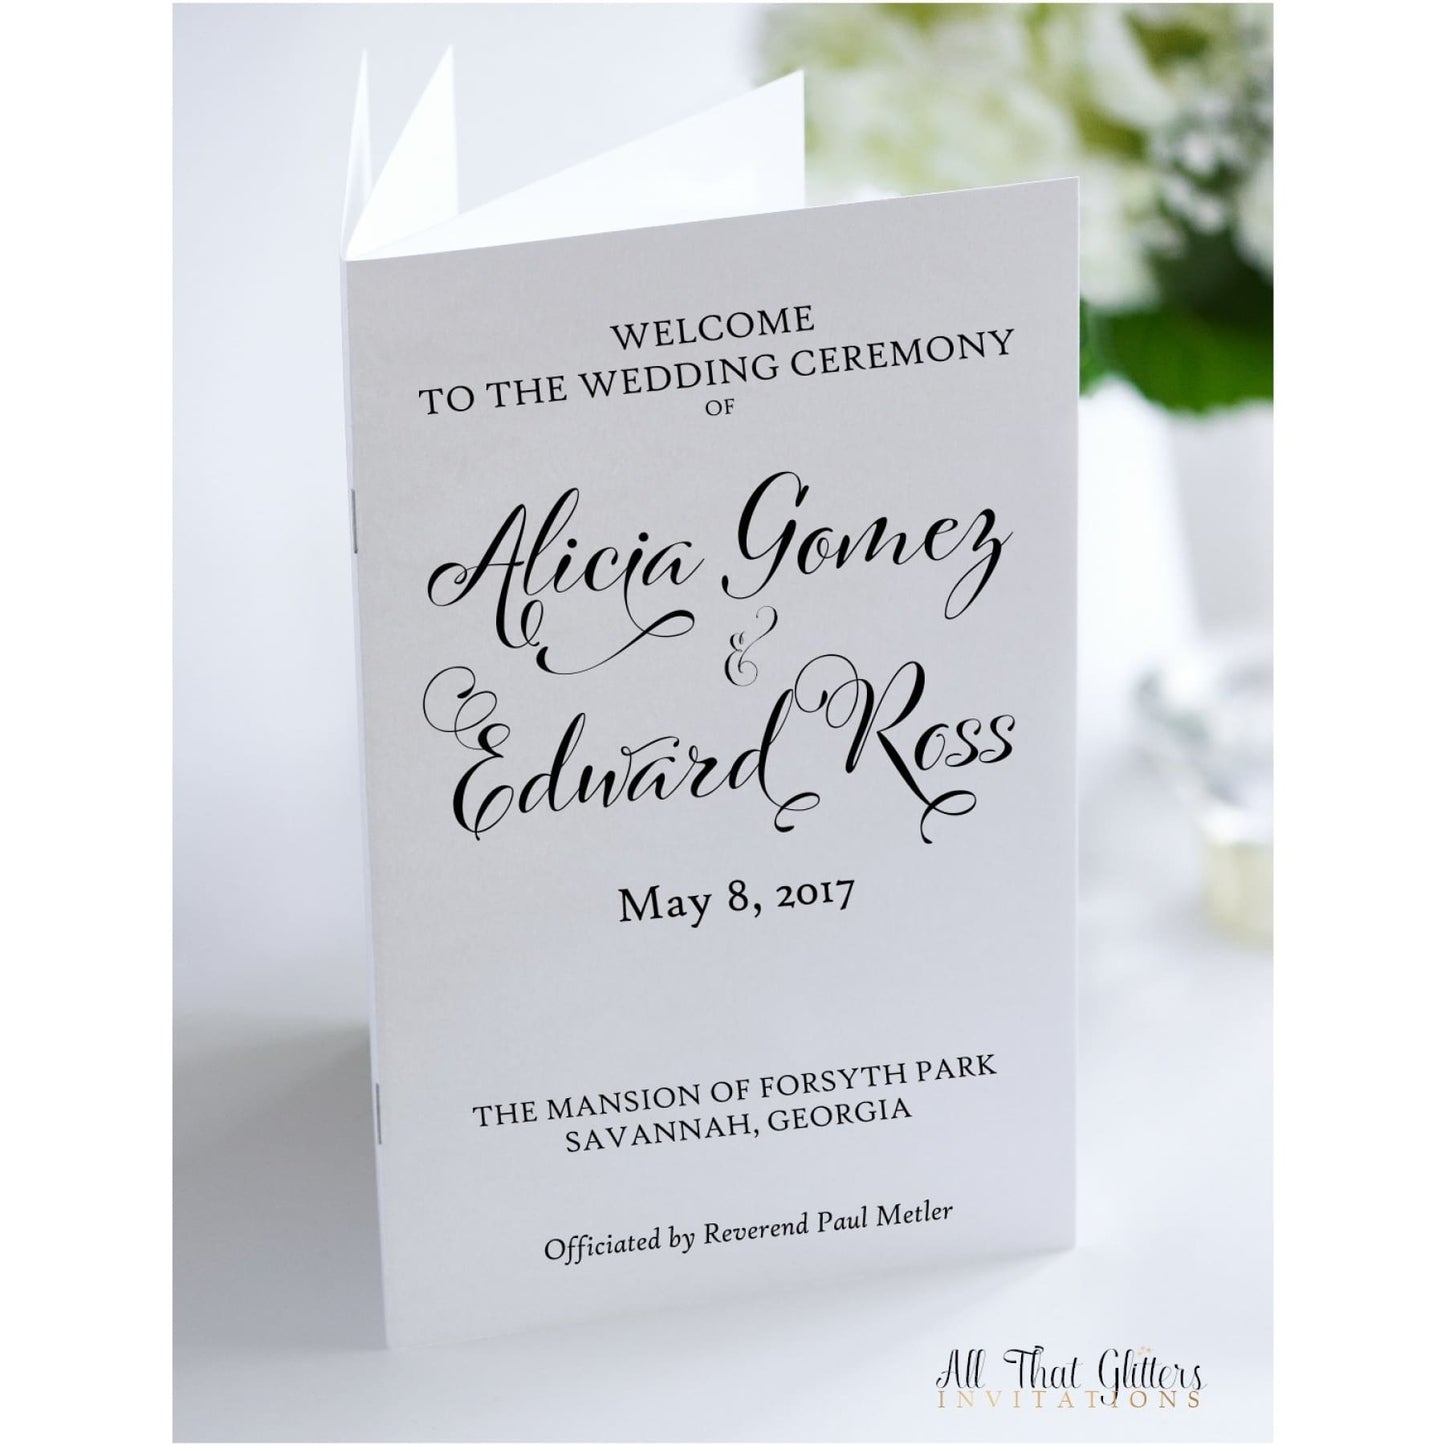 Ceremony Program, 12 Page Book - All That Glitters Invitations